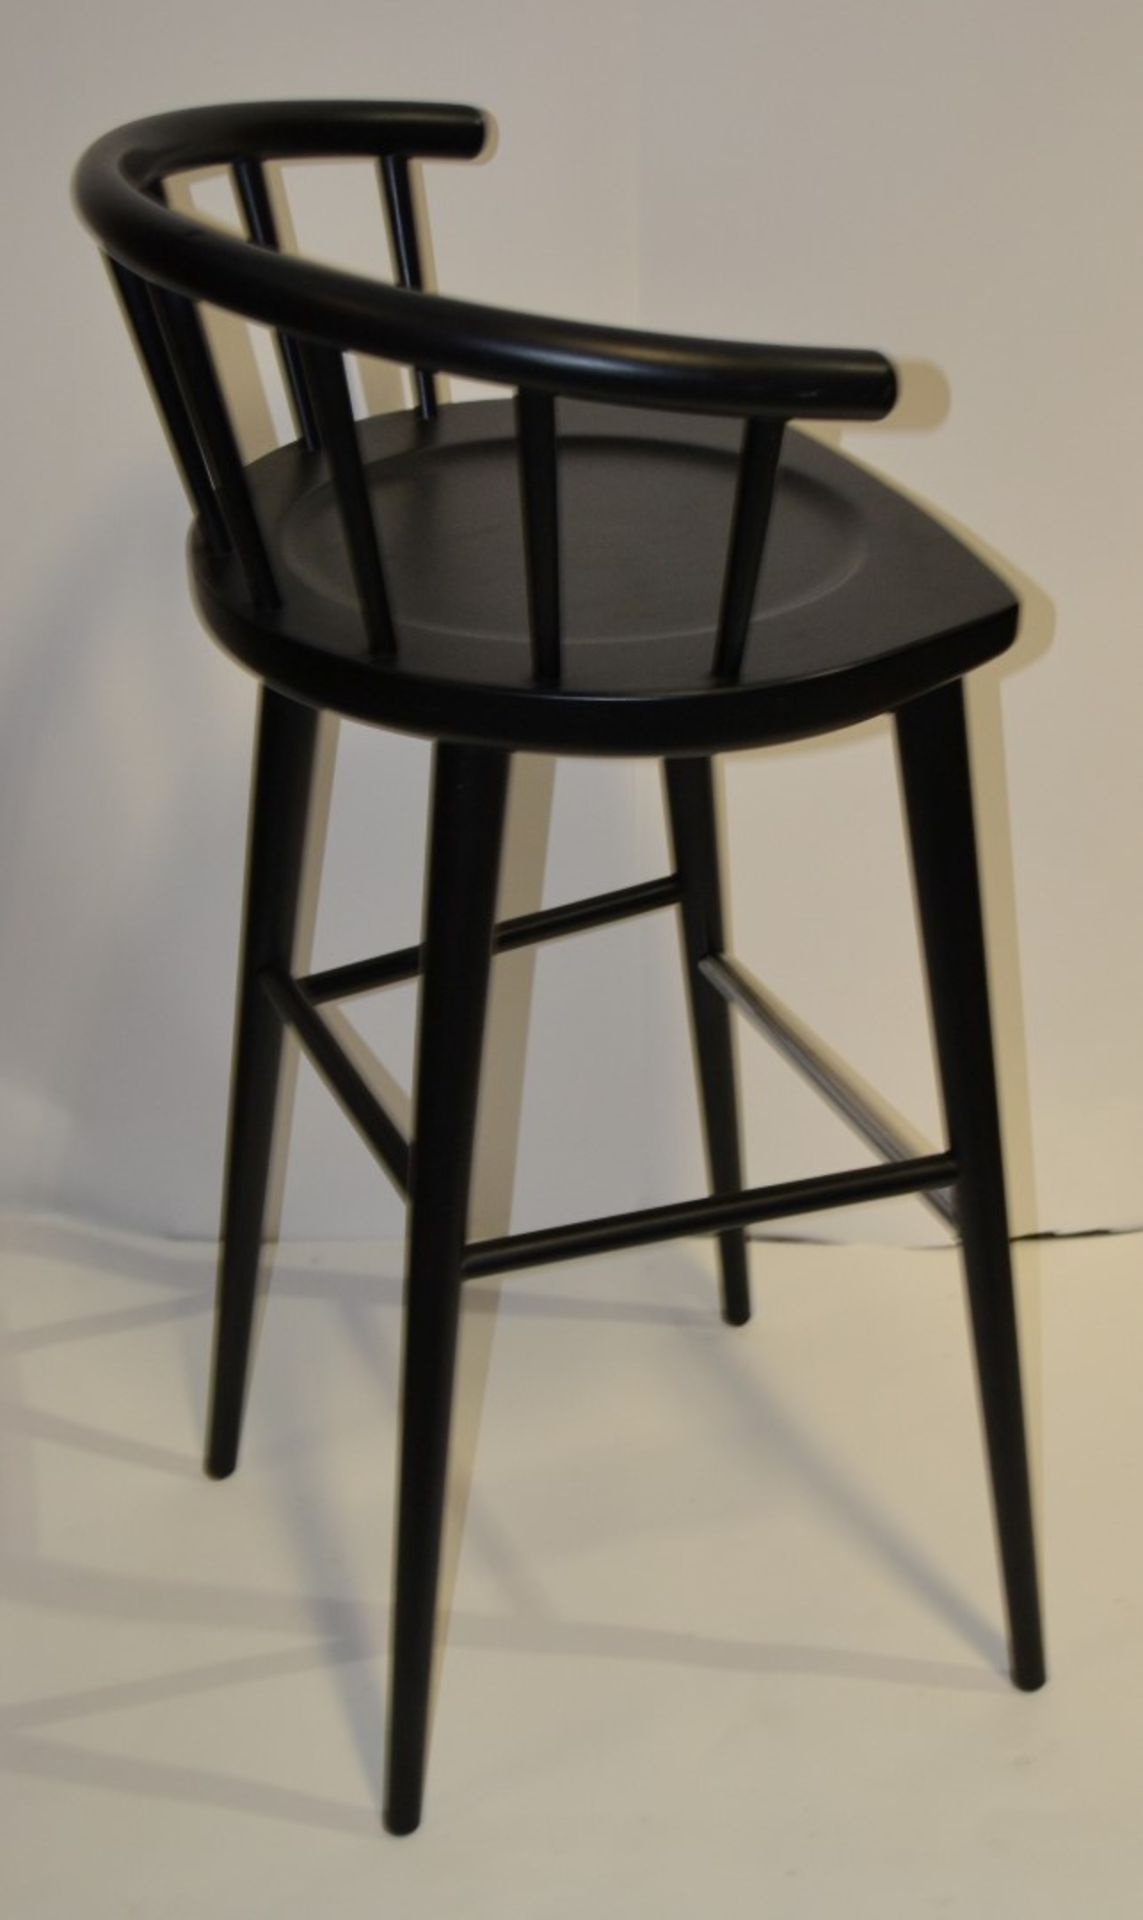 4 x Curved Spindleback Wooden Bar Stools With Shaped Seats, Chrome Footrests and Dark Finish - - Image 4 of 6